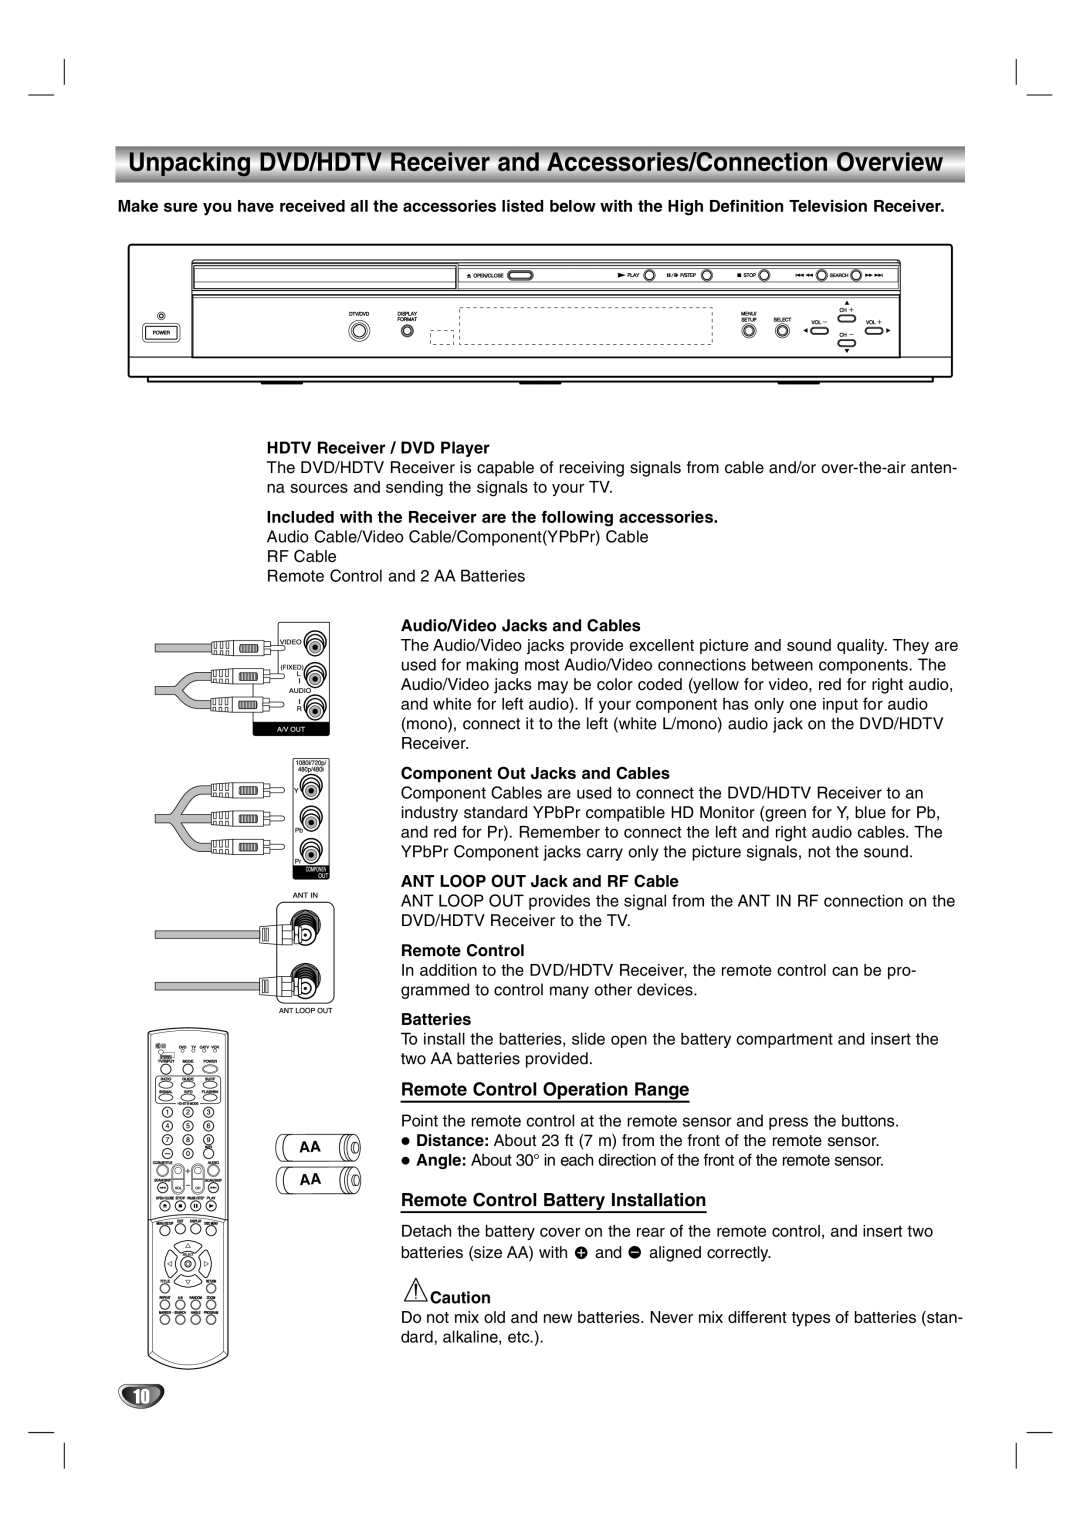 LG Electronics LST-3510A Unpacking DVD/HDTV Receiver and Accessories/Connection Overview, Remote Control Operation Range 